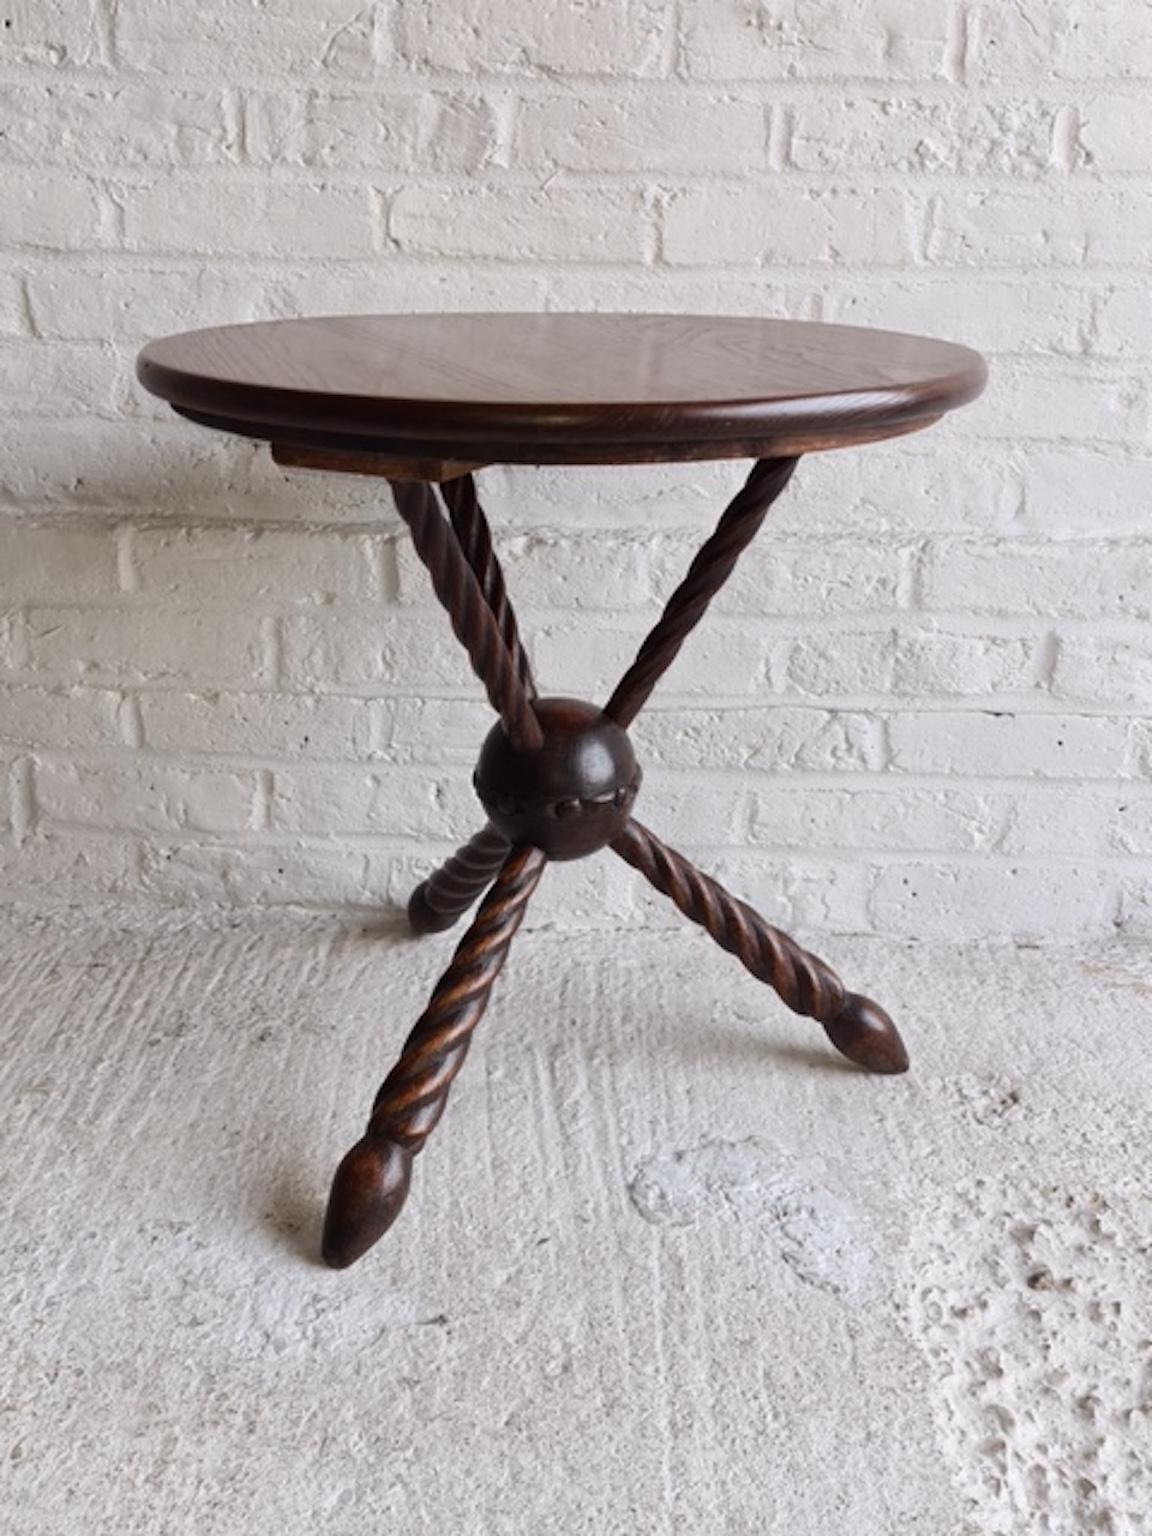 19th Century Gypsy Table, Occasional / Side Table, Tripod Legs, circa 1860-1870 For Sale 2